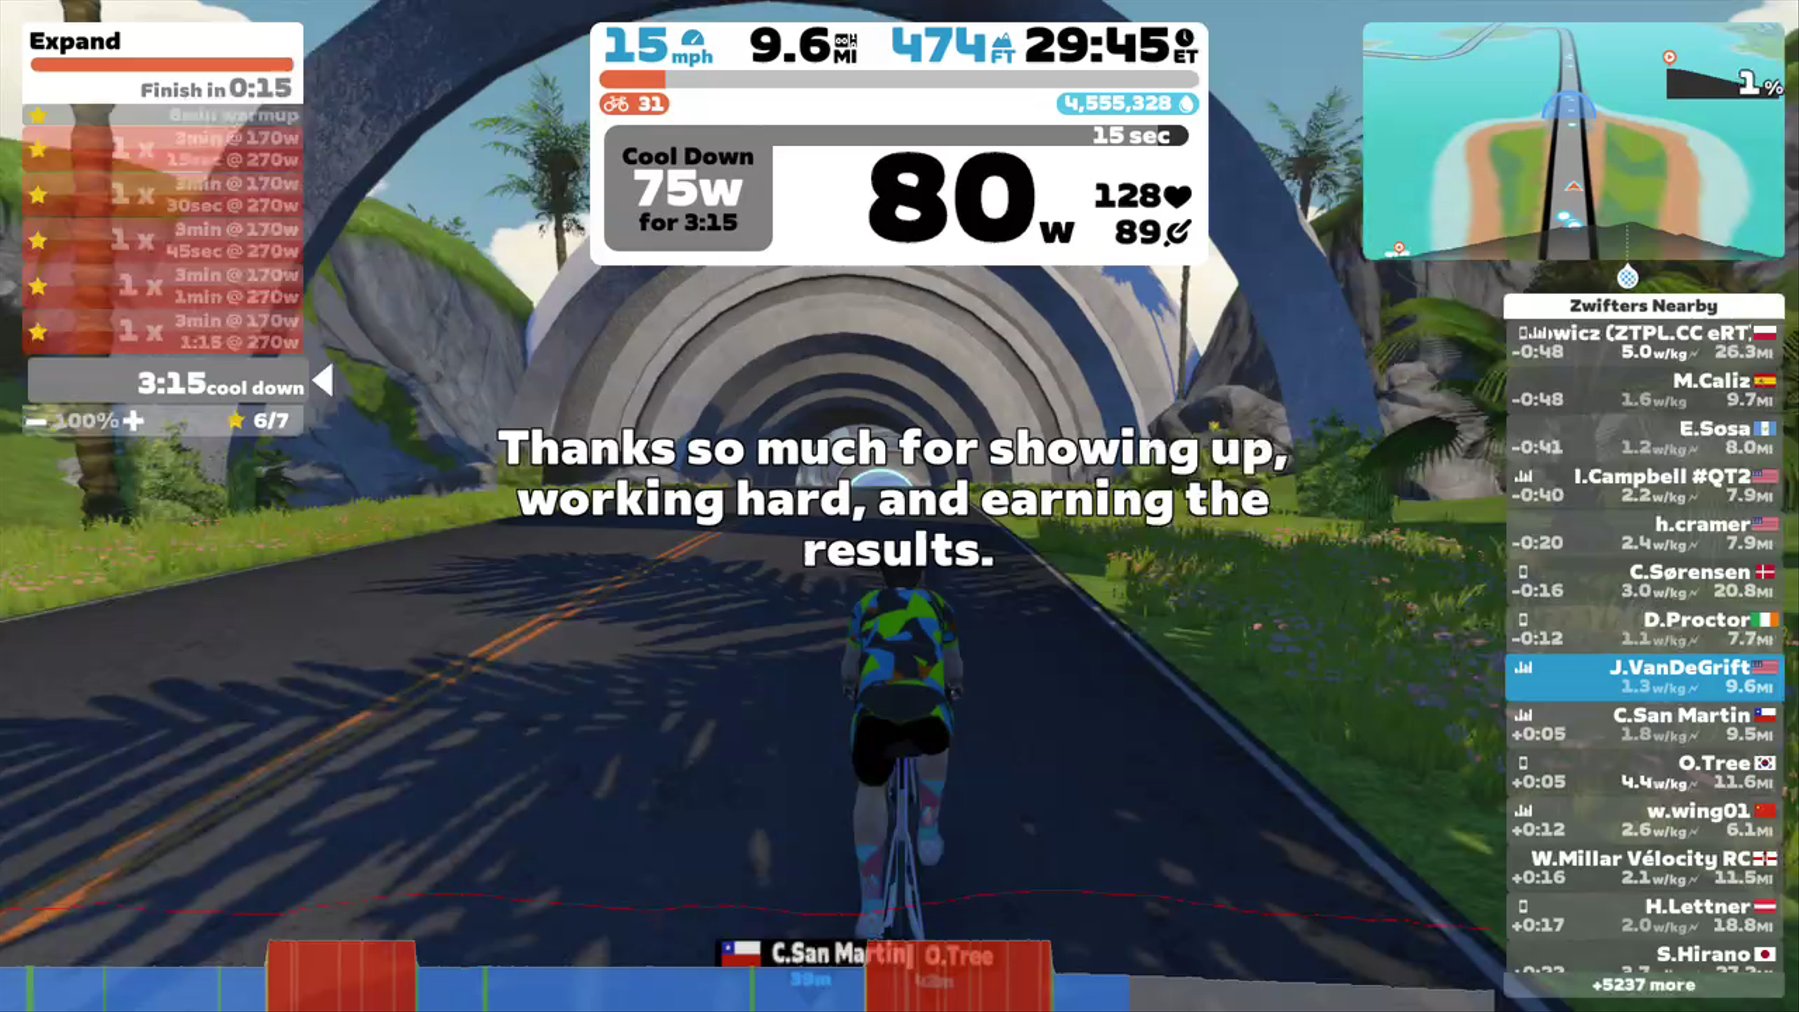 Zwift - Expand in Watopia